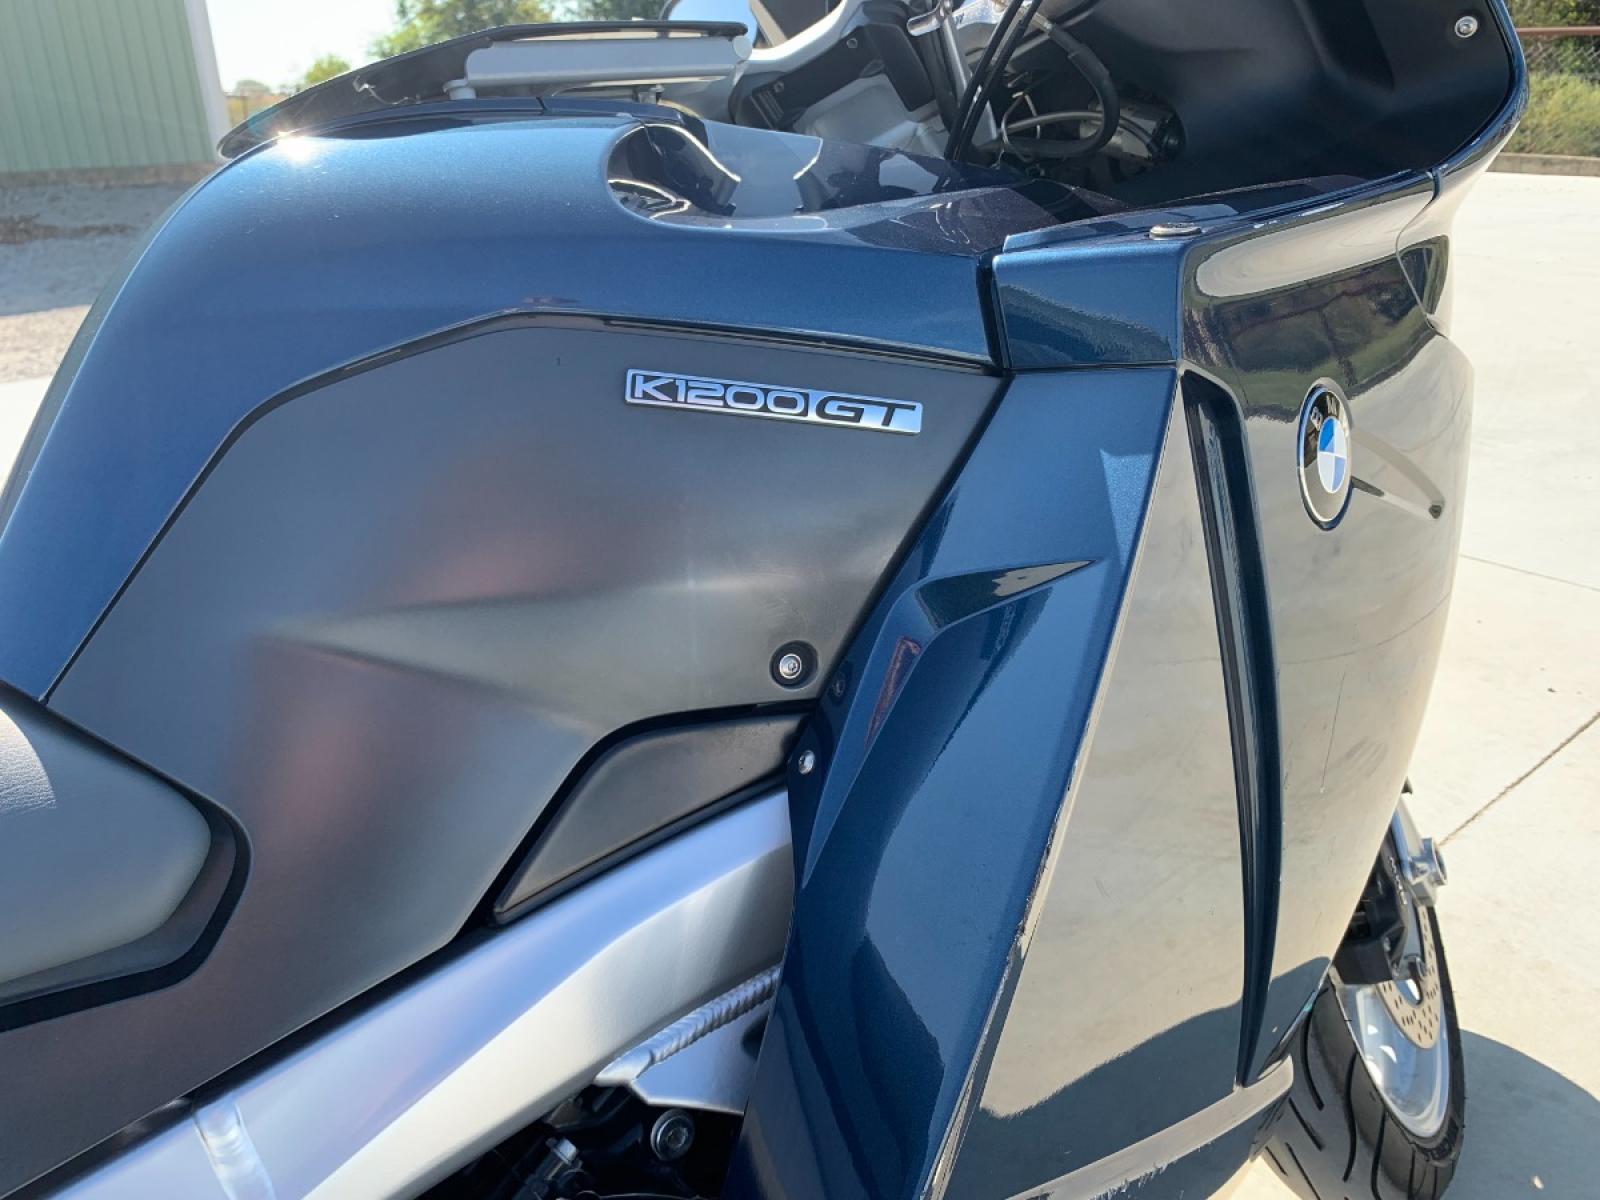 2007 BLUE BMW K1200GT K1200 (WB10597087Z) with an 1157CC engine, located at 17760 HWY 62, MORRIS, 74445, 35.609104, -95.877060 - THE 2007 BMW K1200GT IS A SPORT-TOURING MOTORCYCLE MADE BY BMW. THE SECOND GENERATION K1200GT, INTRODUCED IN 2006, USES ESSENTULY THE SAME INLINE-4 ENGINE AS THE BMW K1200S SPORTSBIKE, WHICH HELD THE WORLD SPEED RECORD IN 2005 FOR ITS CLASS AT 279.33 km/h (173.57 mph), AND THE K1200R. THE NEW MODEL - Photo #11